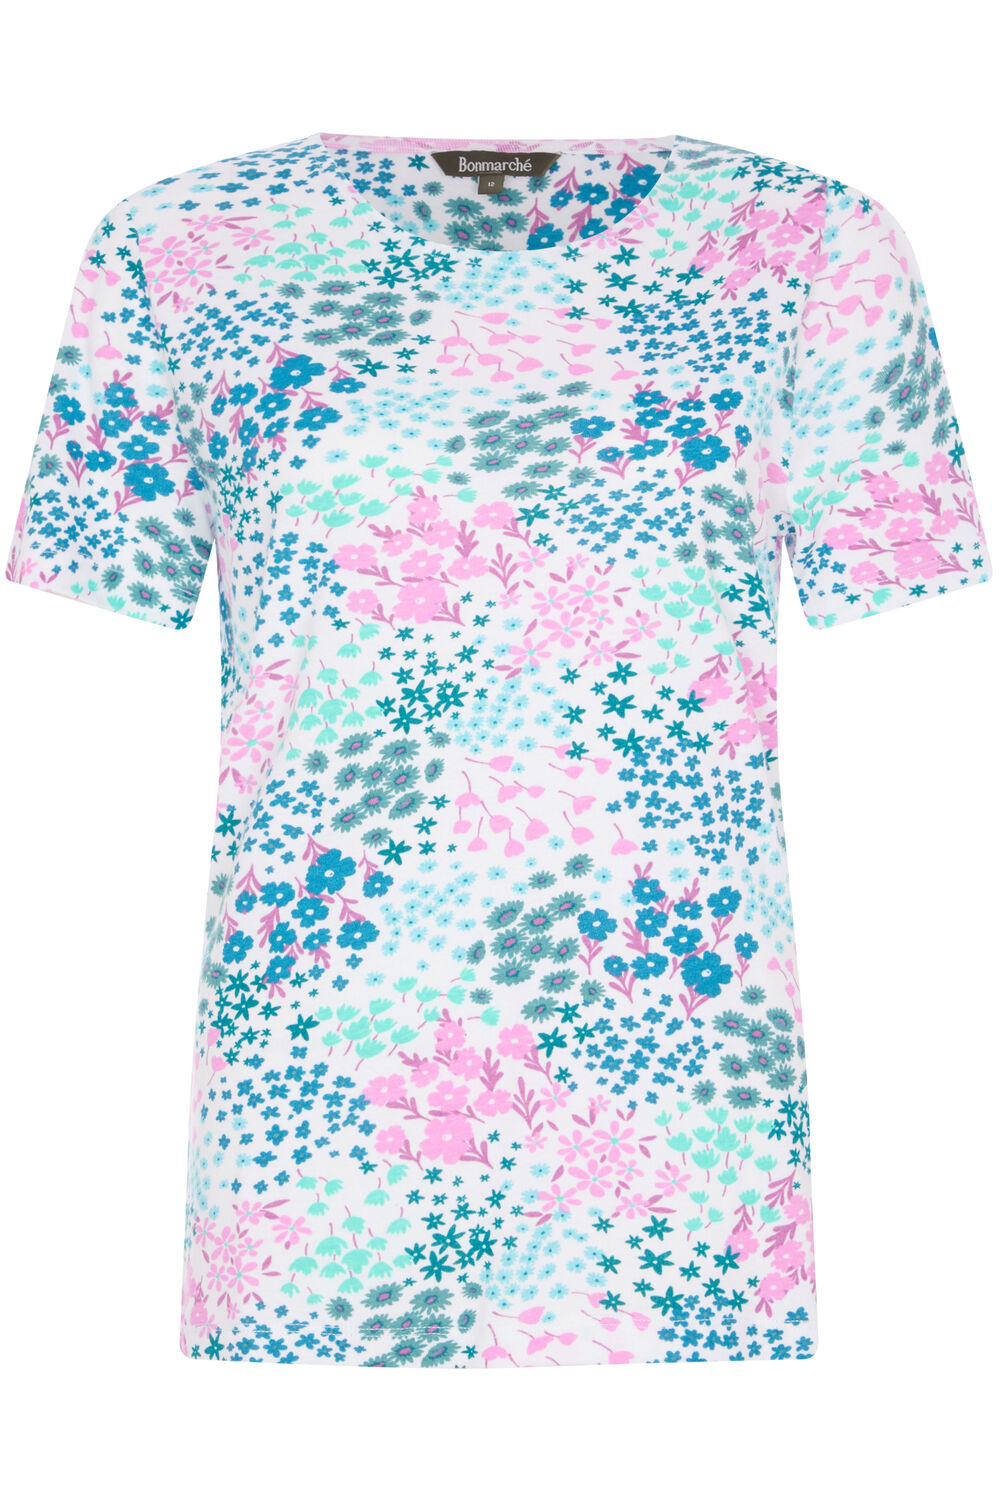 Bonmarche Ivory Short Sleeve Pressed Ditsy Print Scoop Neck T-Shirt, Size: 12